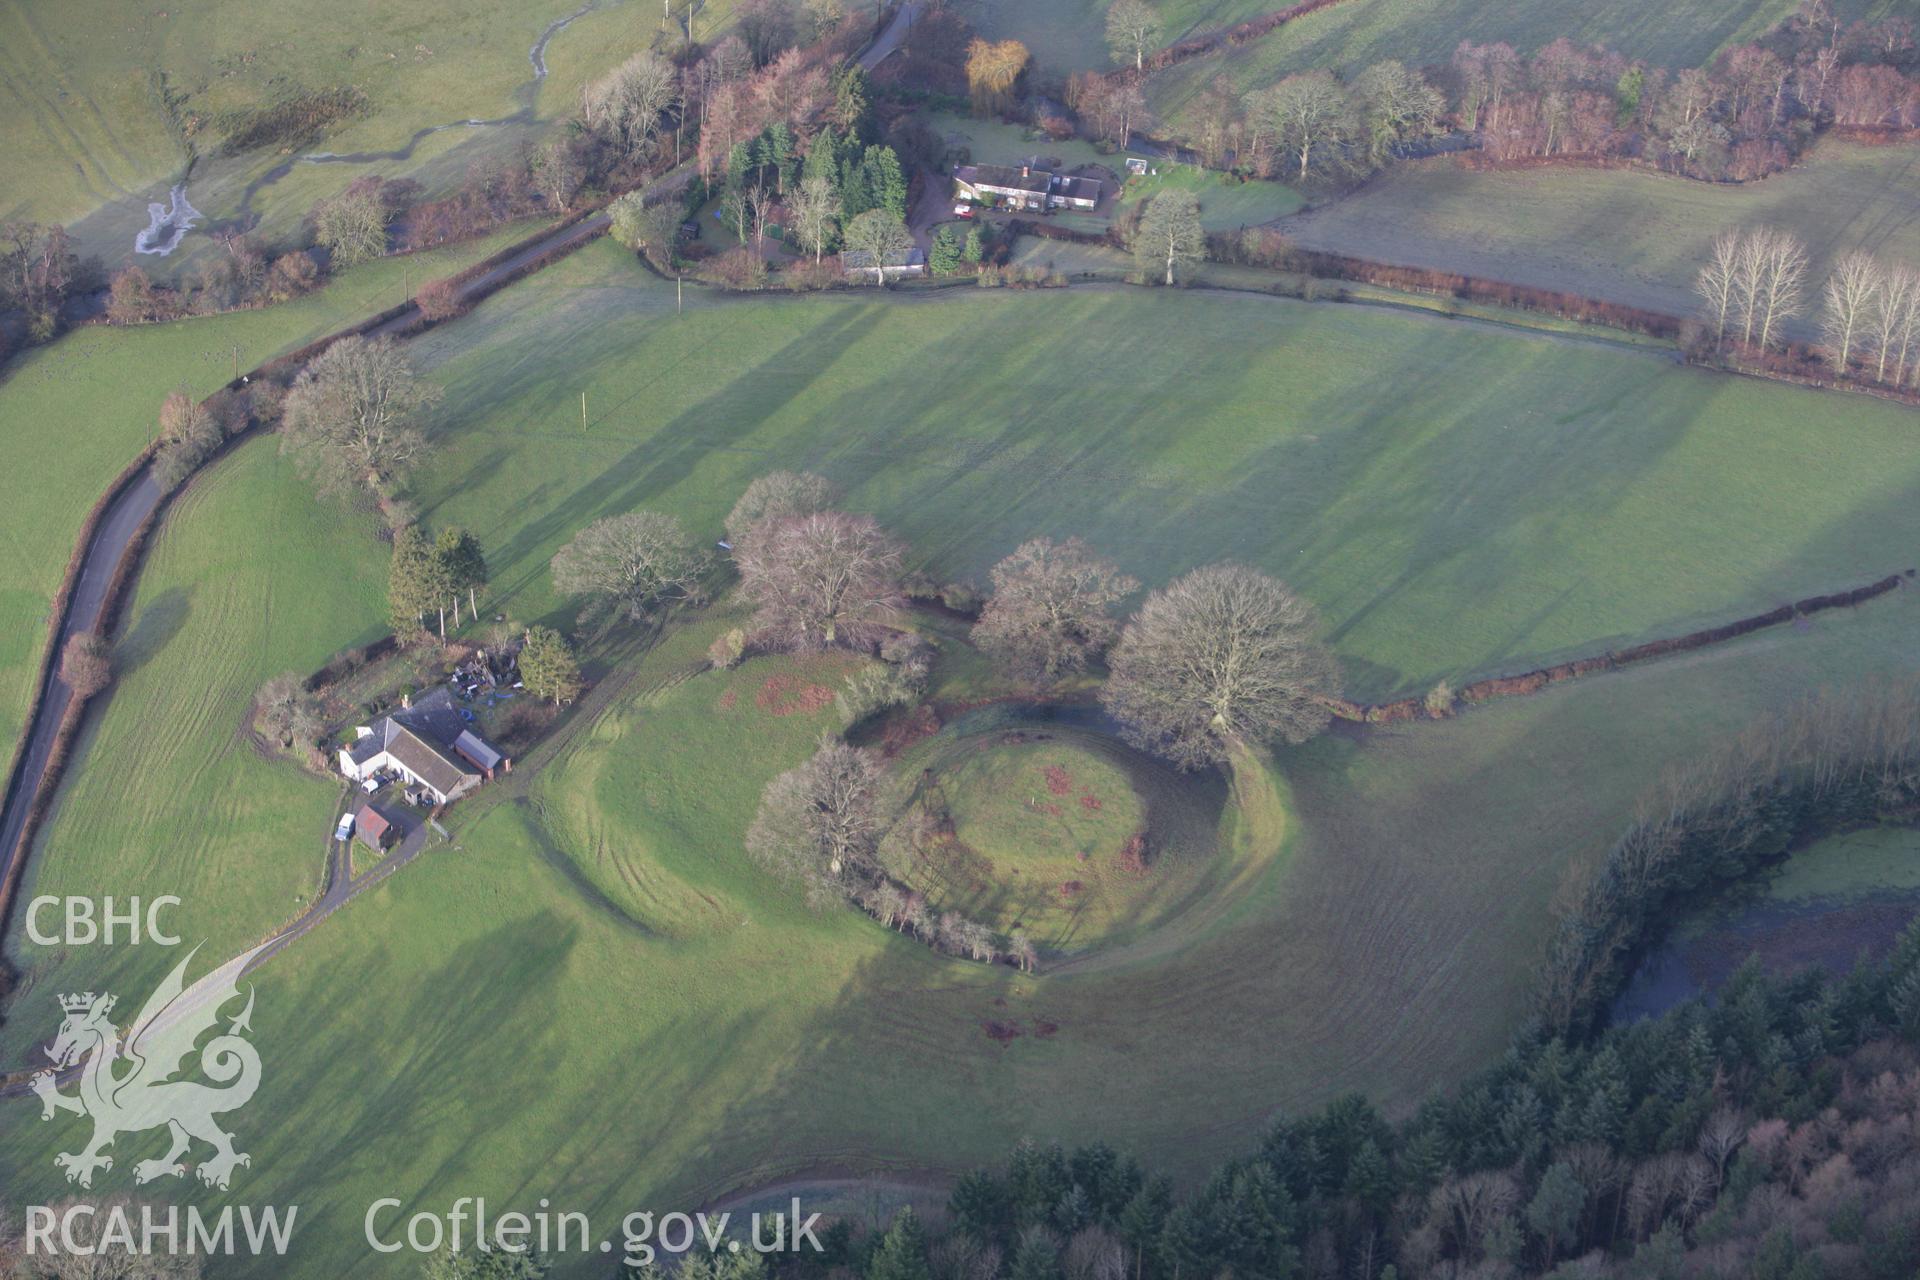 RCAHMW colour oblique photograph of Sycharth castle. Taken by Toby Driver on 21/01/2009.